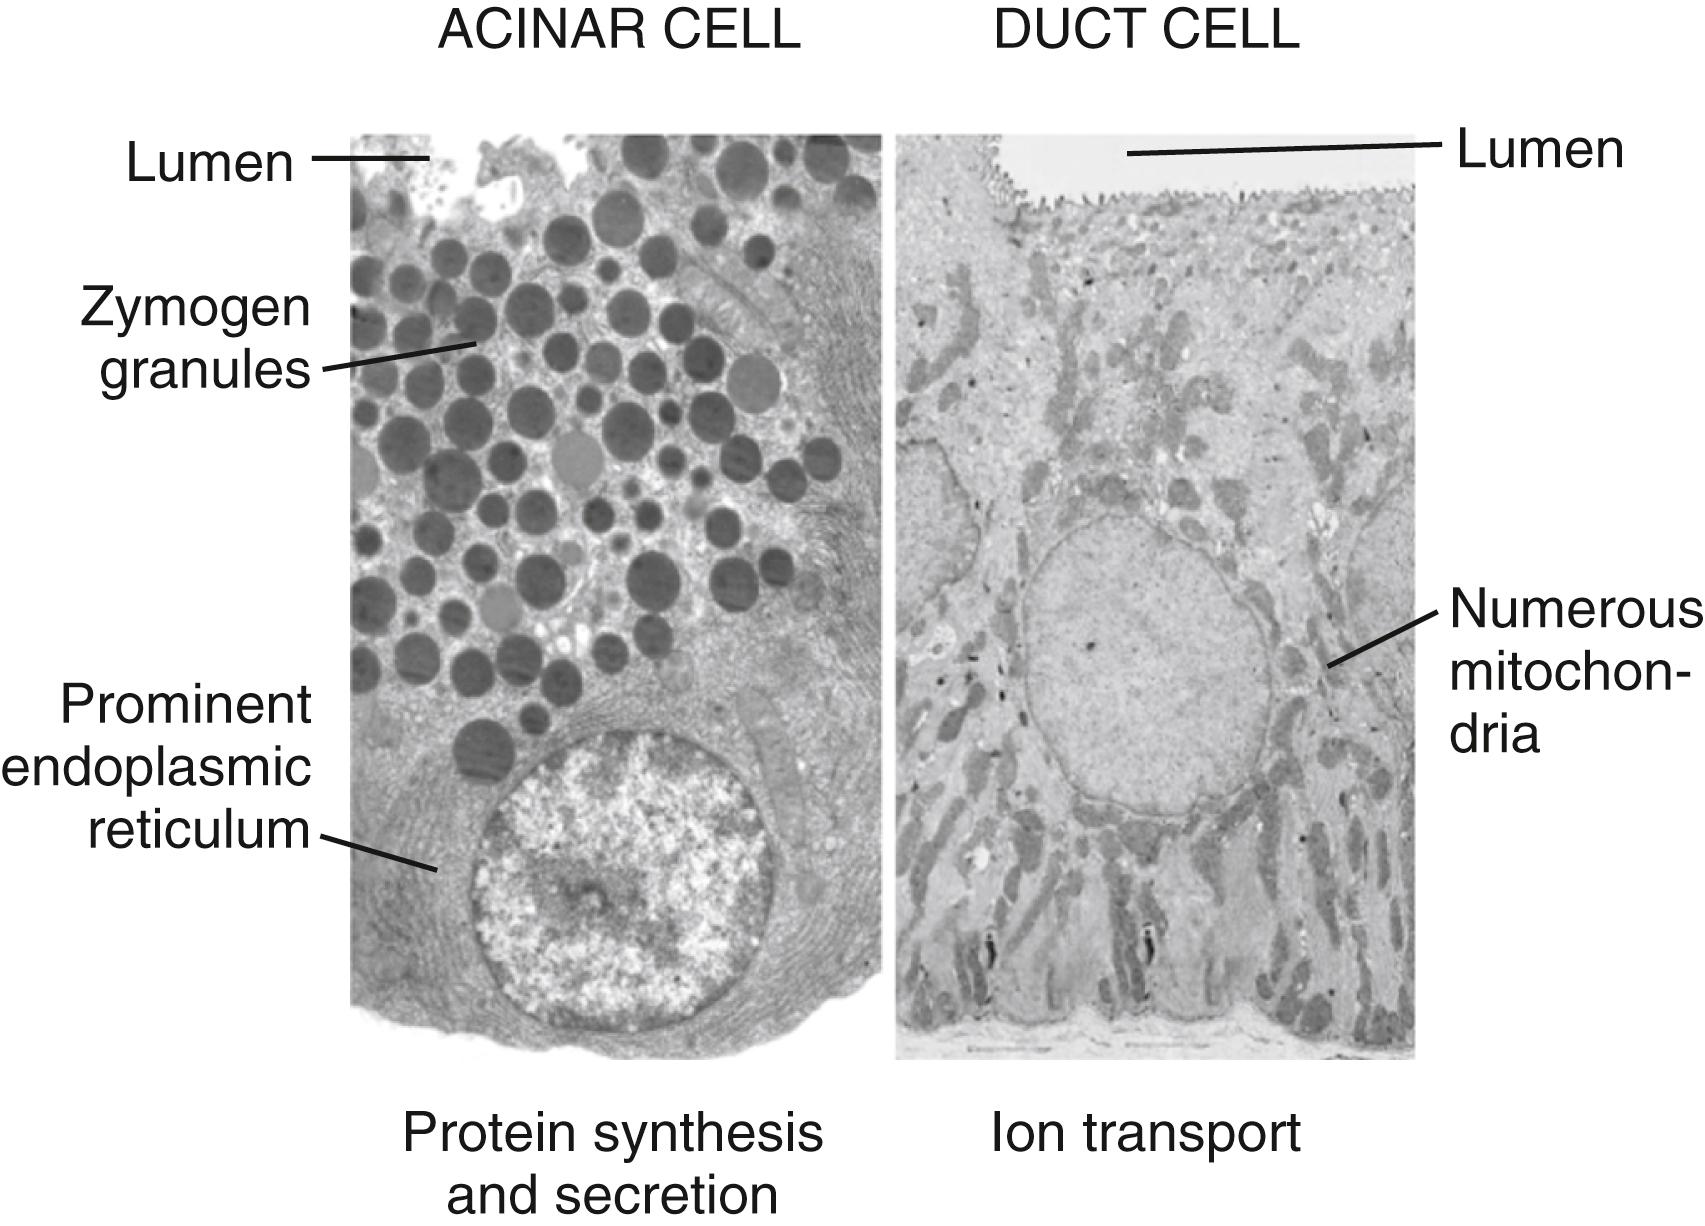 Fig. 56.2, Ultrastructure of exocrine cells. The ultrastructure of exocrine cells reflects their specialized function. The pancreatic acinar cell (left) and duct cell (right) are both polarized, with clearly defined apical (luminal), lateral, and basal domains. The pancreatic acinar cell has prominent basally located rough endoplasmic reticulum for synthesis of digestive enzymes and apically located zymogen granules for storage and secretion of digestive enzymes. The pancreatic duct cell contains numerous mitochondria for energy generation needed for its ion transport functions.